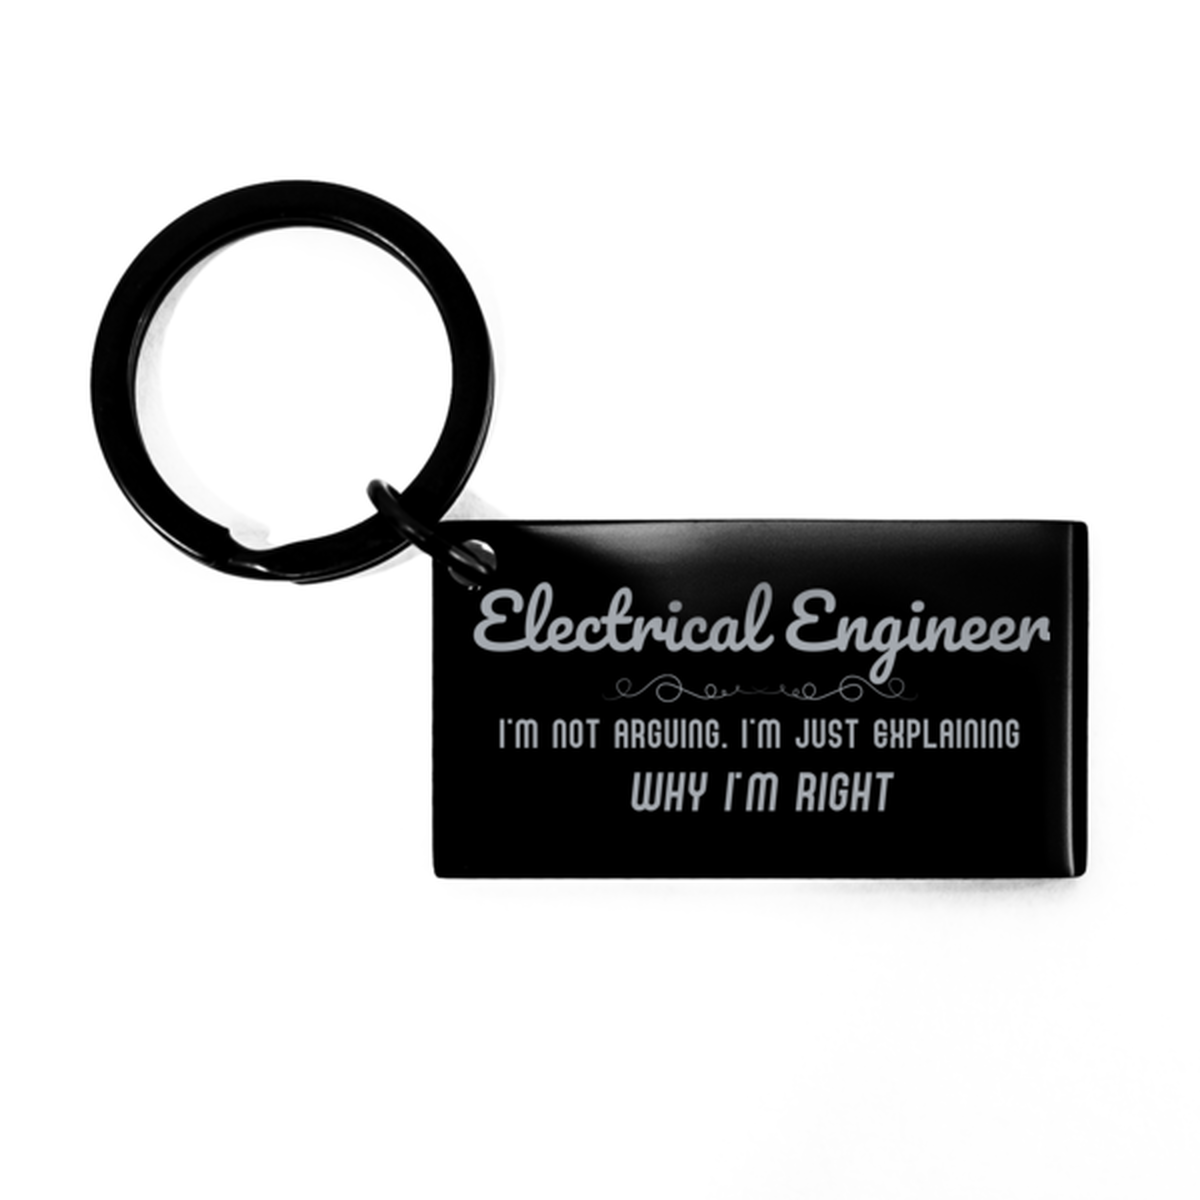 Electrical Engineer I'm not Arguing. I'm Just Explaining Why I'm RIGHT Keychain, Funny Saying Quote Electrical Engineer Gifts For Electrical Engineer Graduation Birthday Christmas Gifts for Men Women Coworker